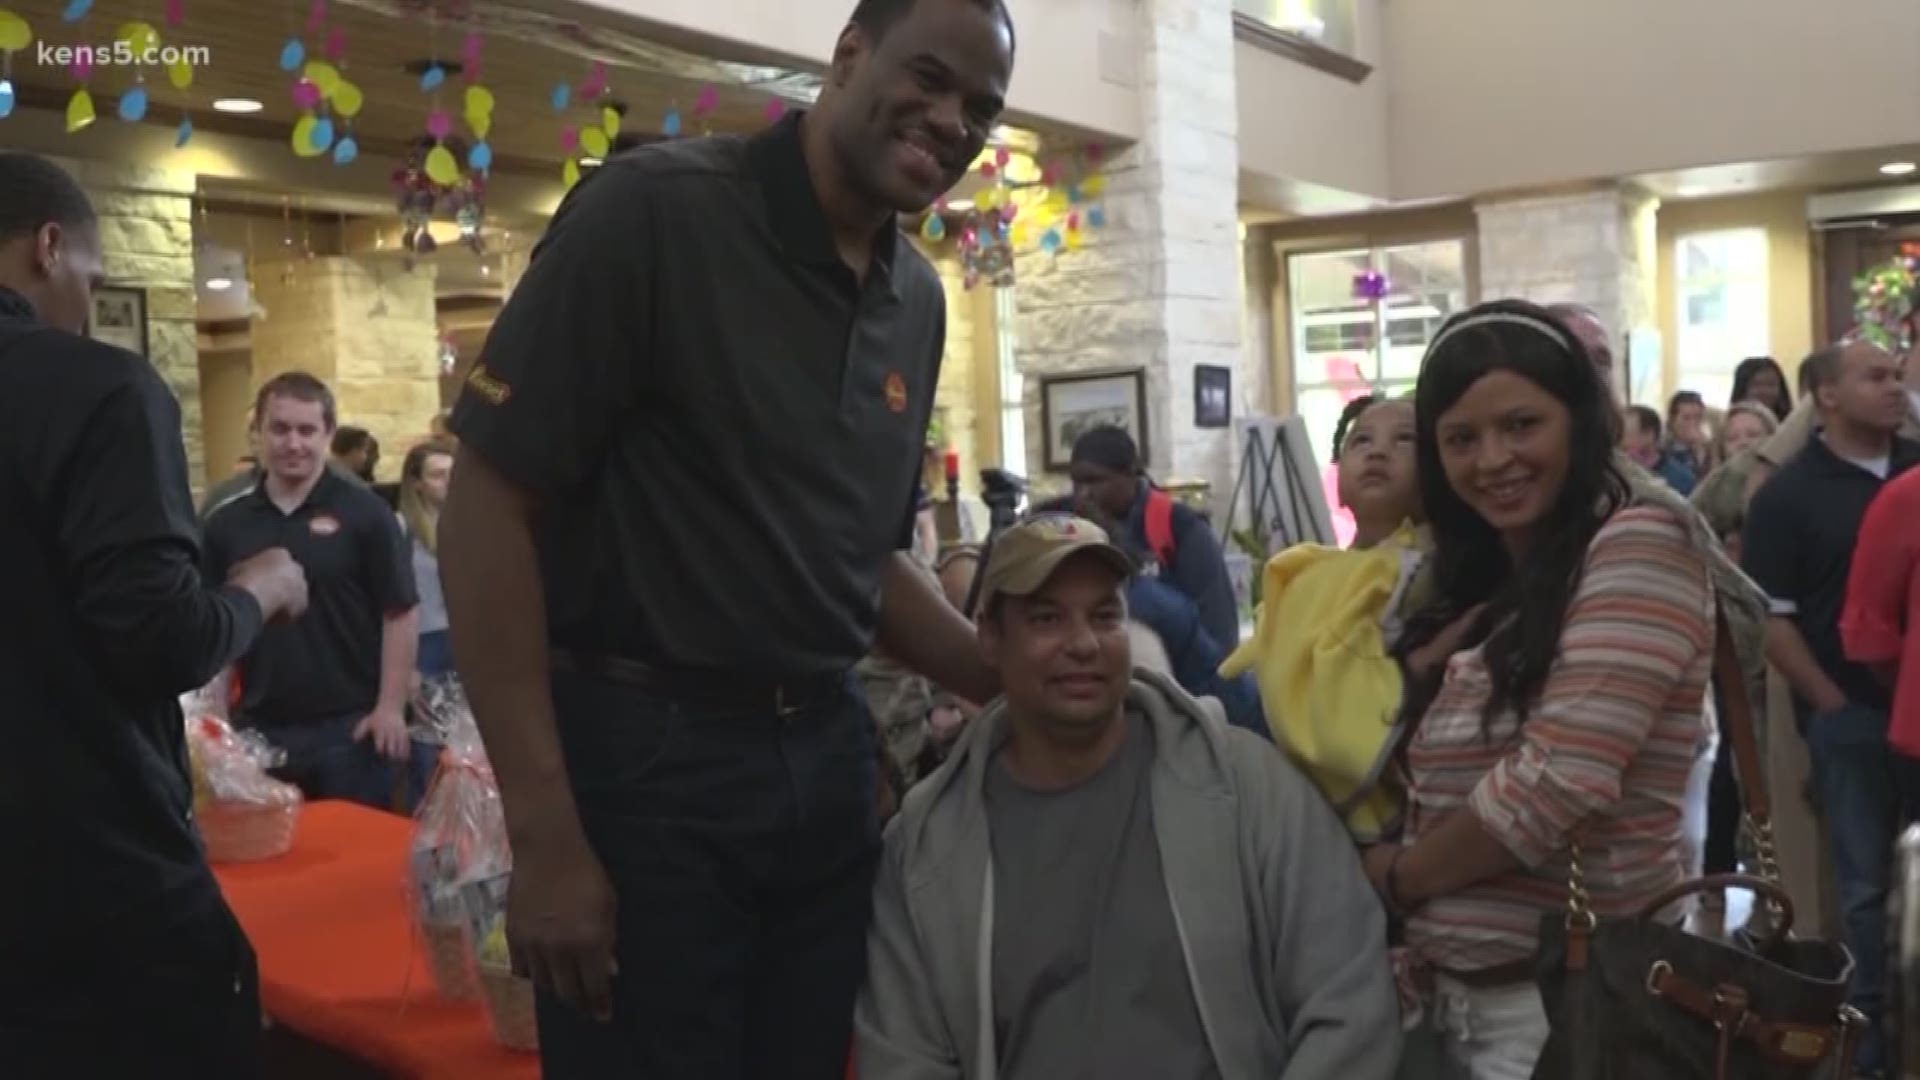 College basketball all-stars visited the Warrior and Family Support Center, with a special guest, Spurs legend David Robinson.